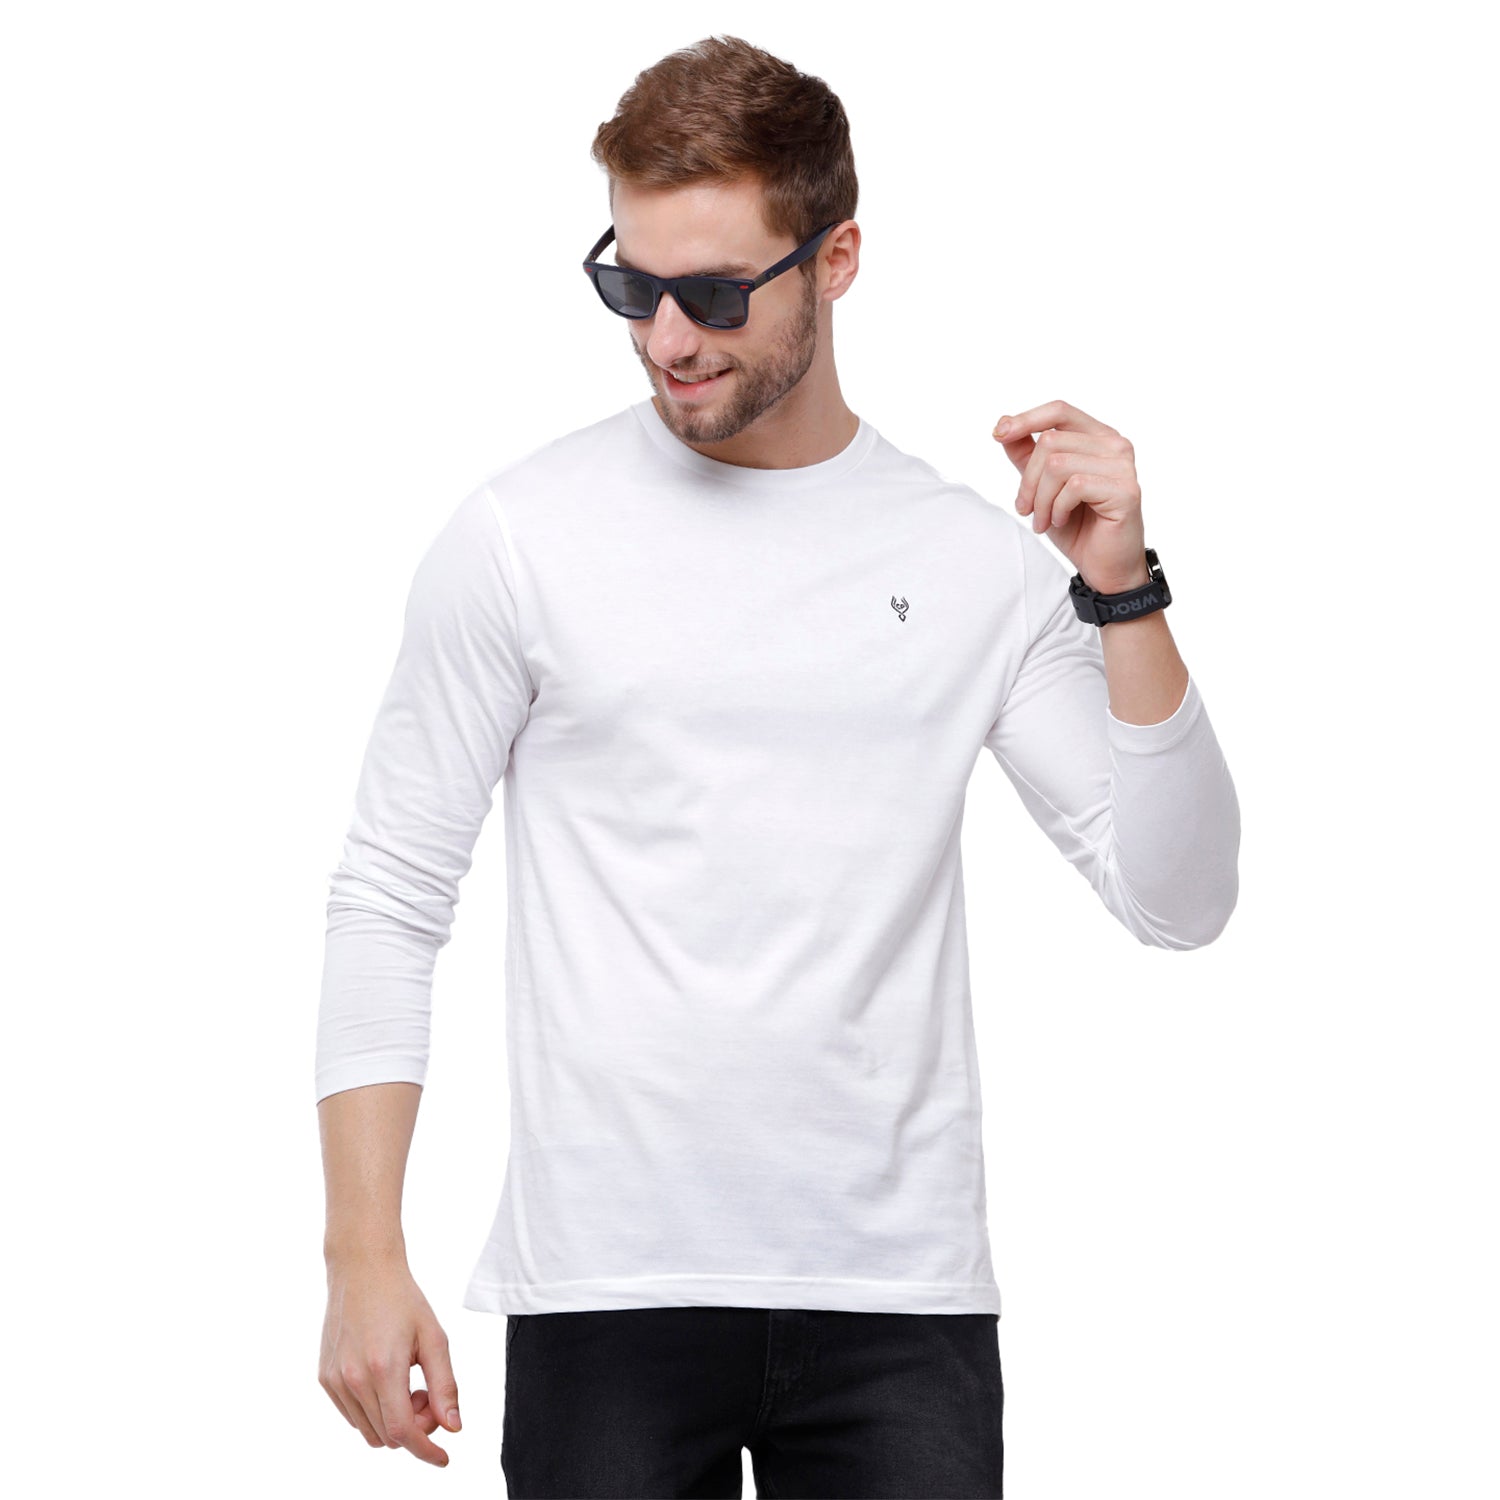 Classic polo Men's White Single Jersey Crew Neck Full Sleeve Slim Fit T-Shirt - Comet 01 T-shirt Classic Polo 